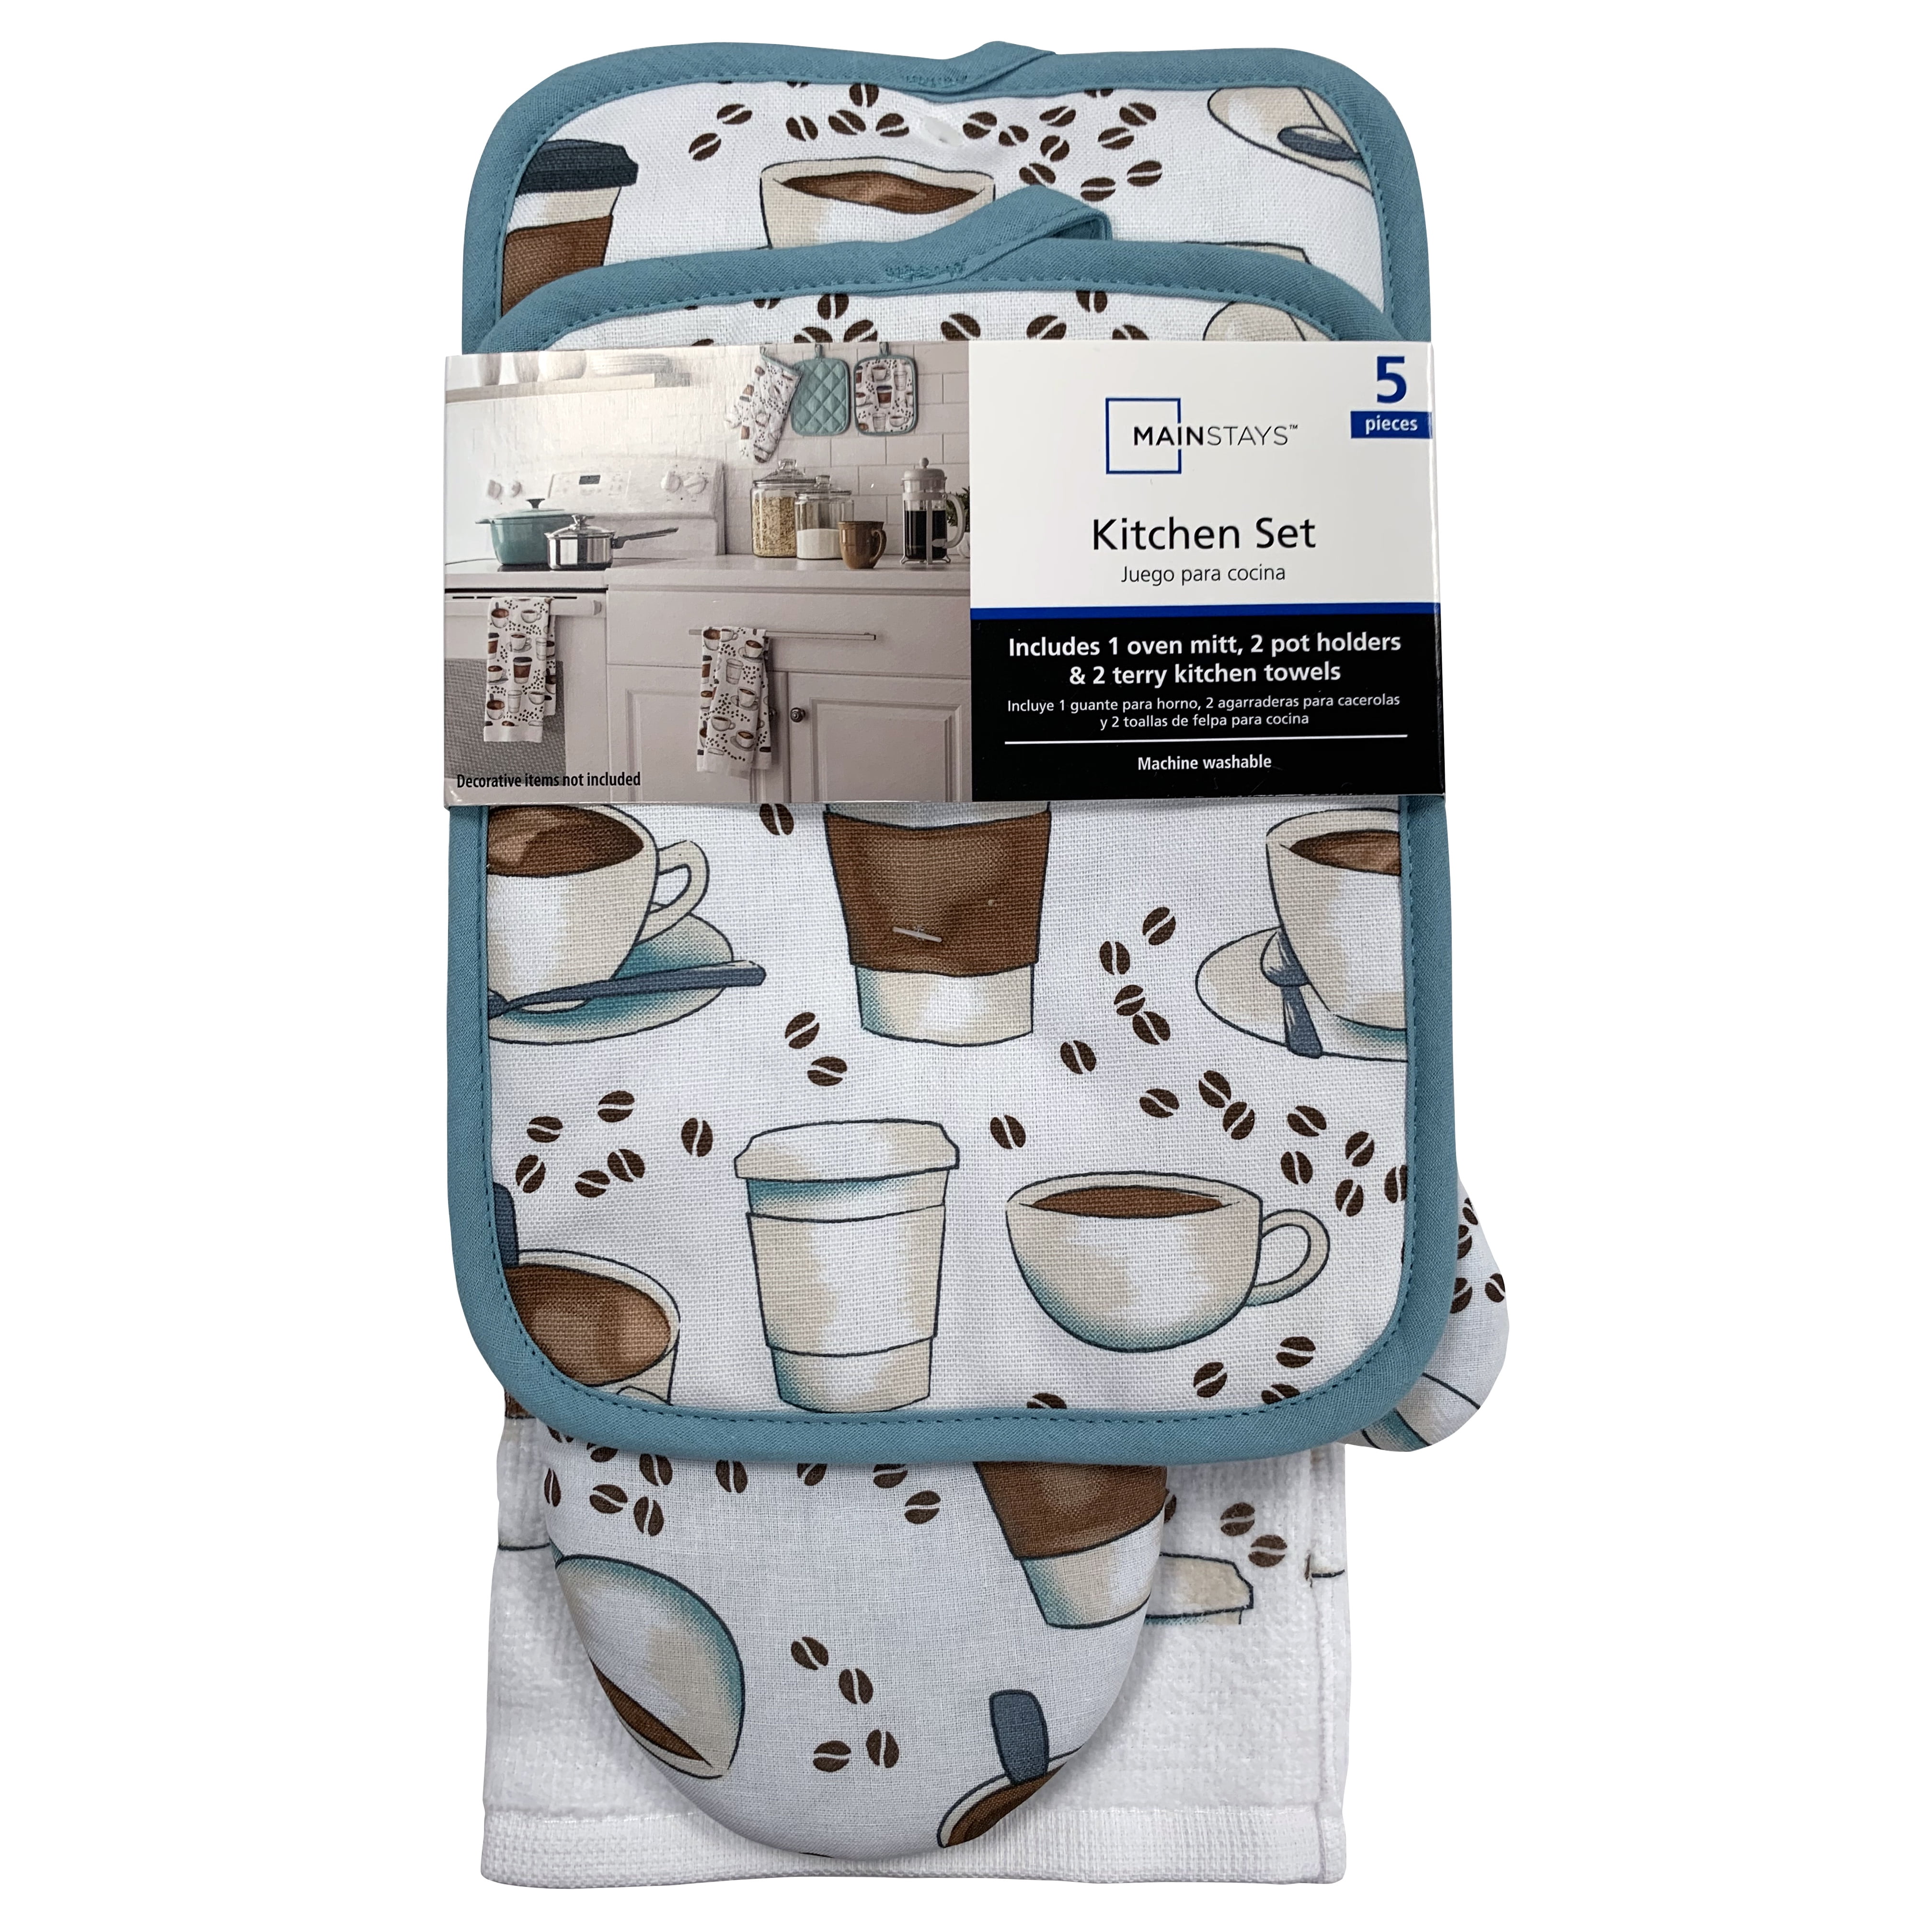 Lunch Money Dish Towels Set of 2 Decorative Coffee Theme Kitchen Towels  Hand Towel for Bathroom Decorative Set Everything Gets Better with Coffee